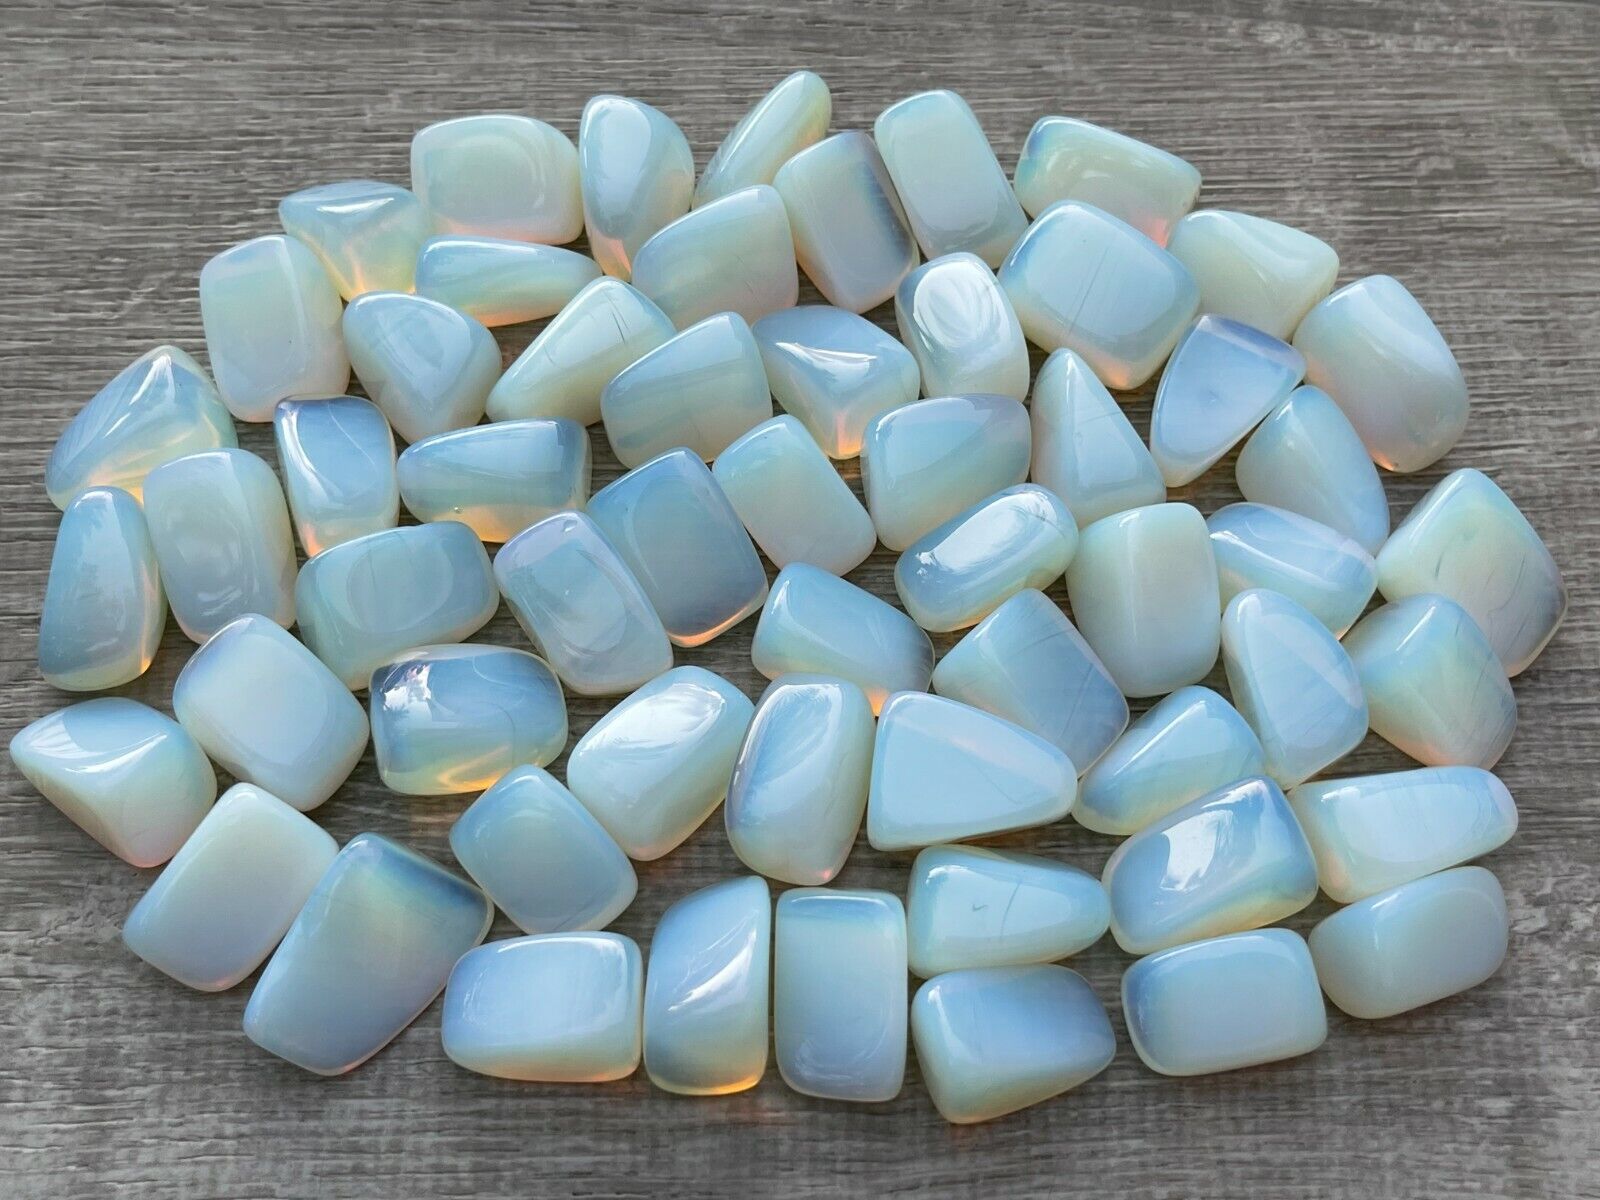 Grade A++ Opalite Tumbled Stones, 0.85-1.25 Inches Tumbled Opalite,Wholesale Lot